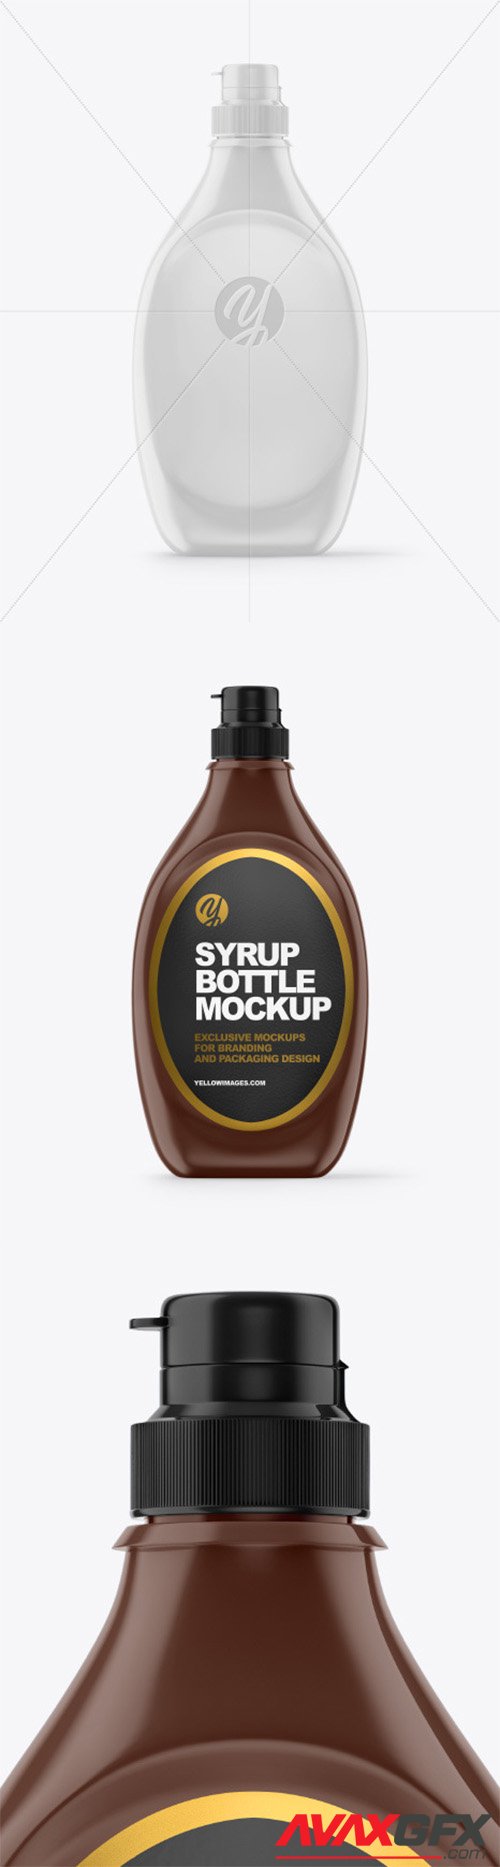 Download Glossy Plastic Syrup Bottle Mockup 61347 Avaxgfx All Downloads That You Need In One Place Graphic From Nitroflare Rapidgator Yellowimages Mockups